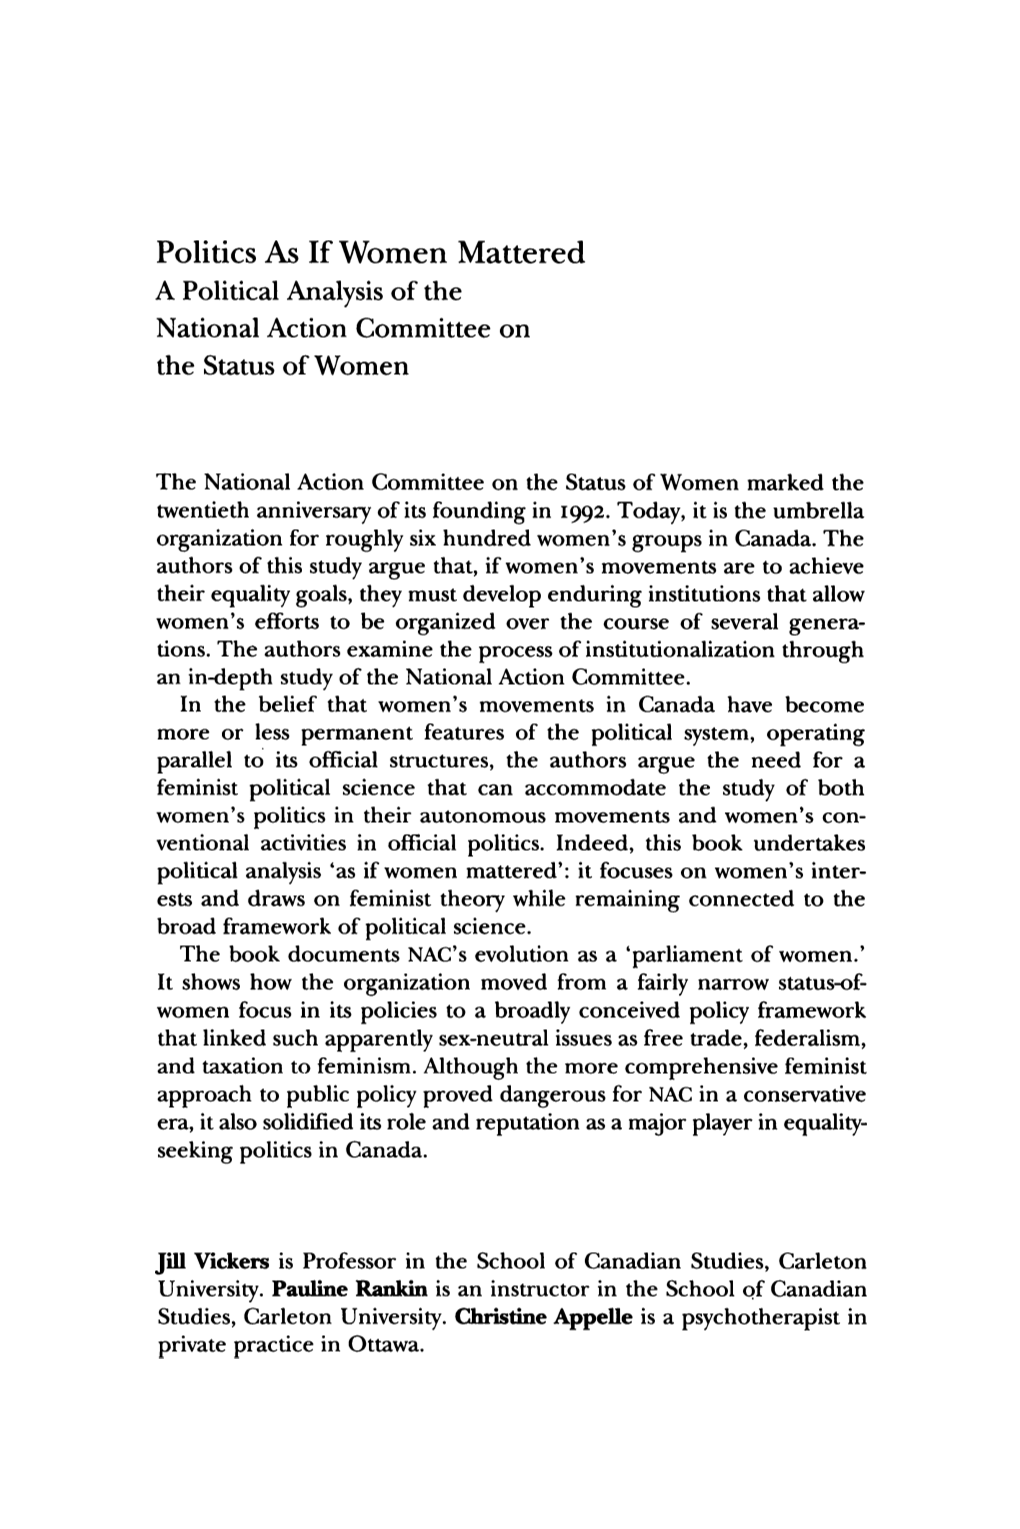 Politics As If Women Mattered a Political Analysis of the National Action Committee on the Status of Women